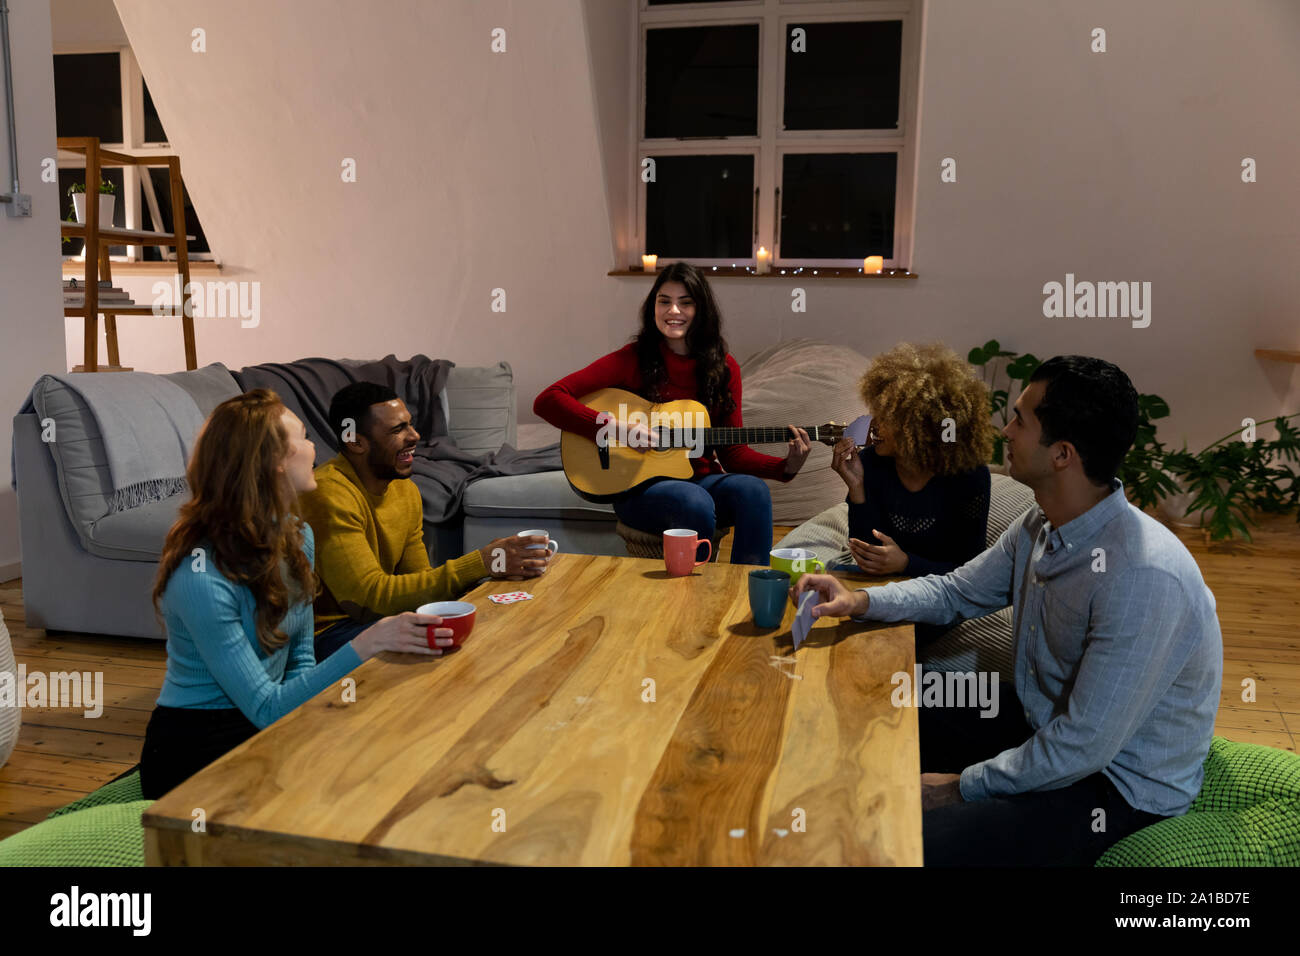 Millennial adult friends socialising together at home Stock Photo